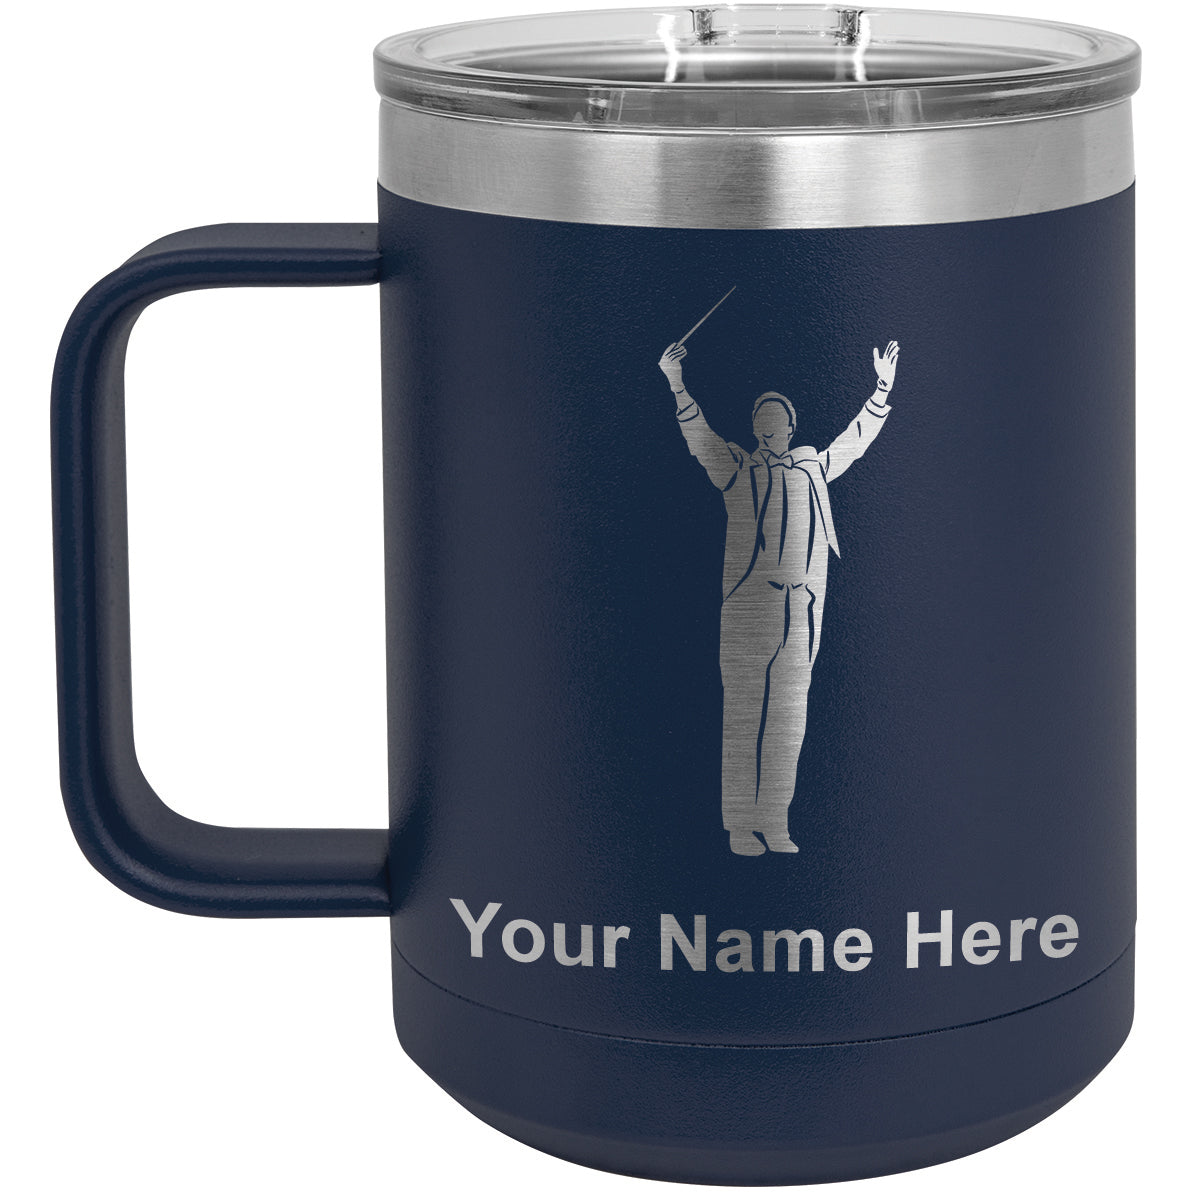 15oz Vacuum Insulated Coffee Mug, Band Director, Personalized Engraving Included